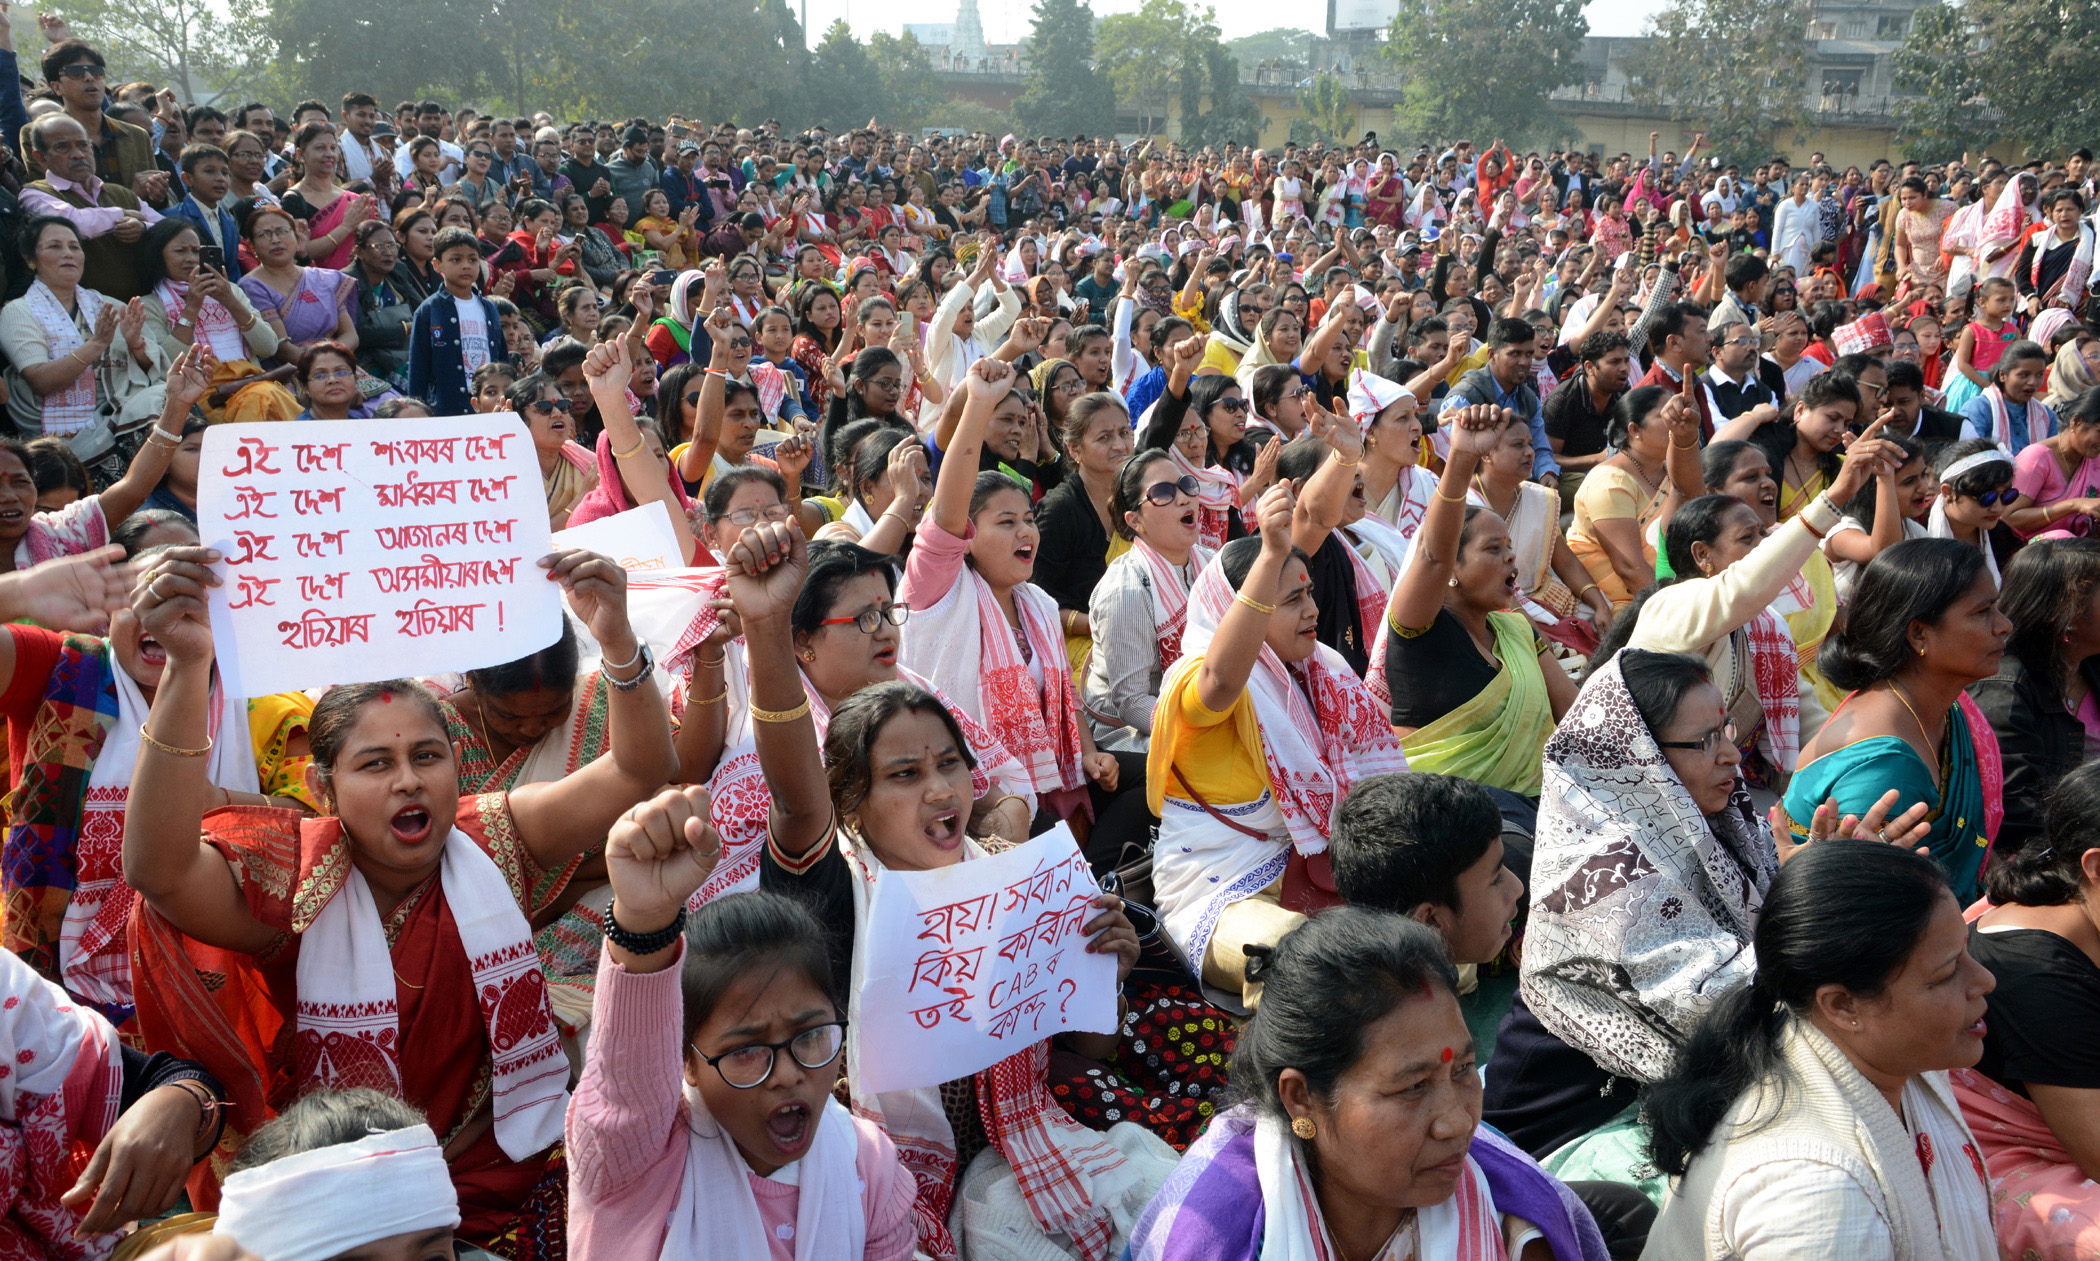 epa08081361 Artists from Assam along with citizens shout slogans as they take part in a demonstration demanding withdrawal of the Citizenship Amendment Act 2019 (CAA) in Guwahati, India, 19 December 2019. The CAA will give Indian citizenship rights to refugees from Hindu, Jain, Buddhist, Sikhs, Parsi or Christian communities coming from Afghanistan, Bangladesh and Pakistan.  EPA/STR